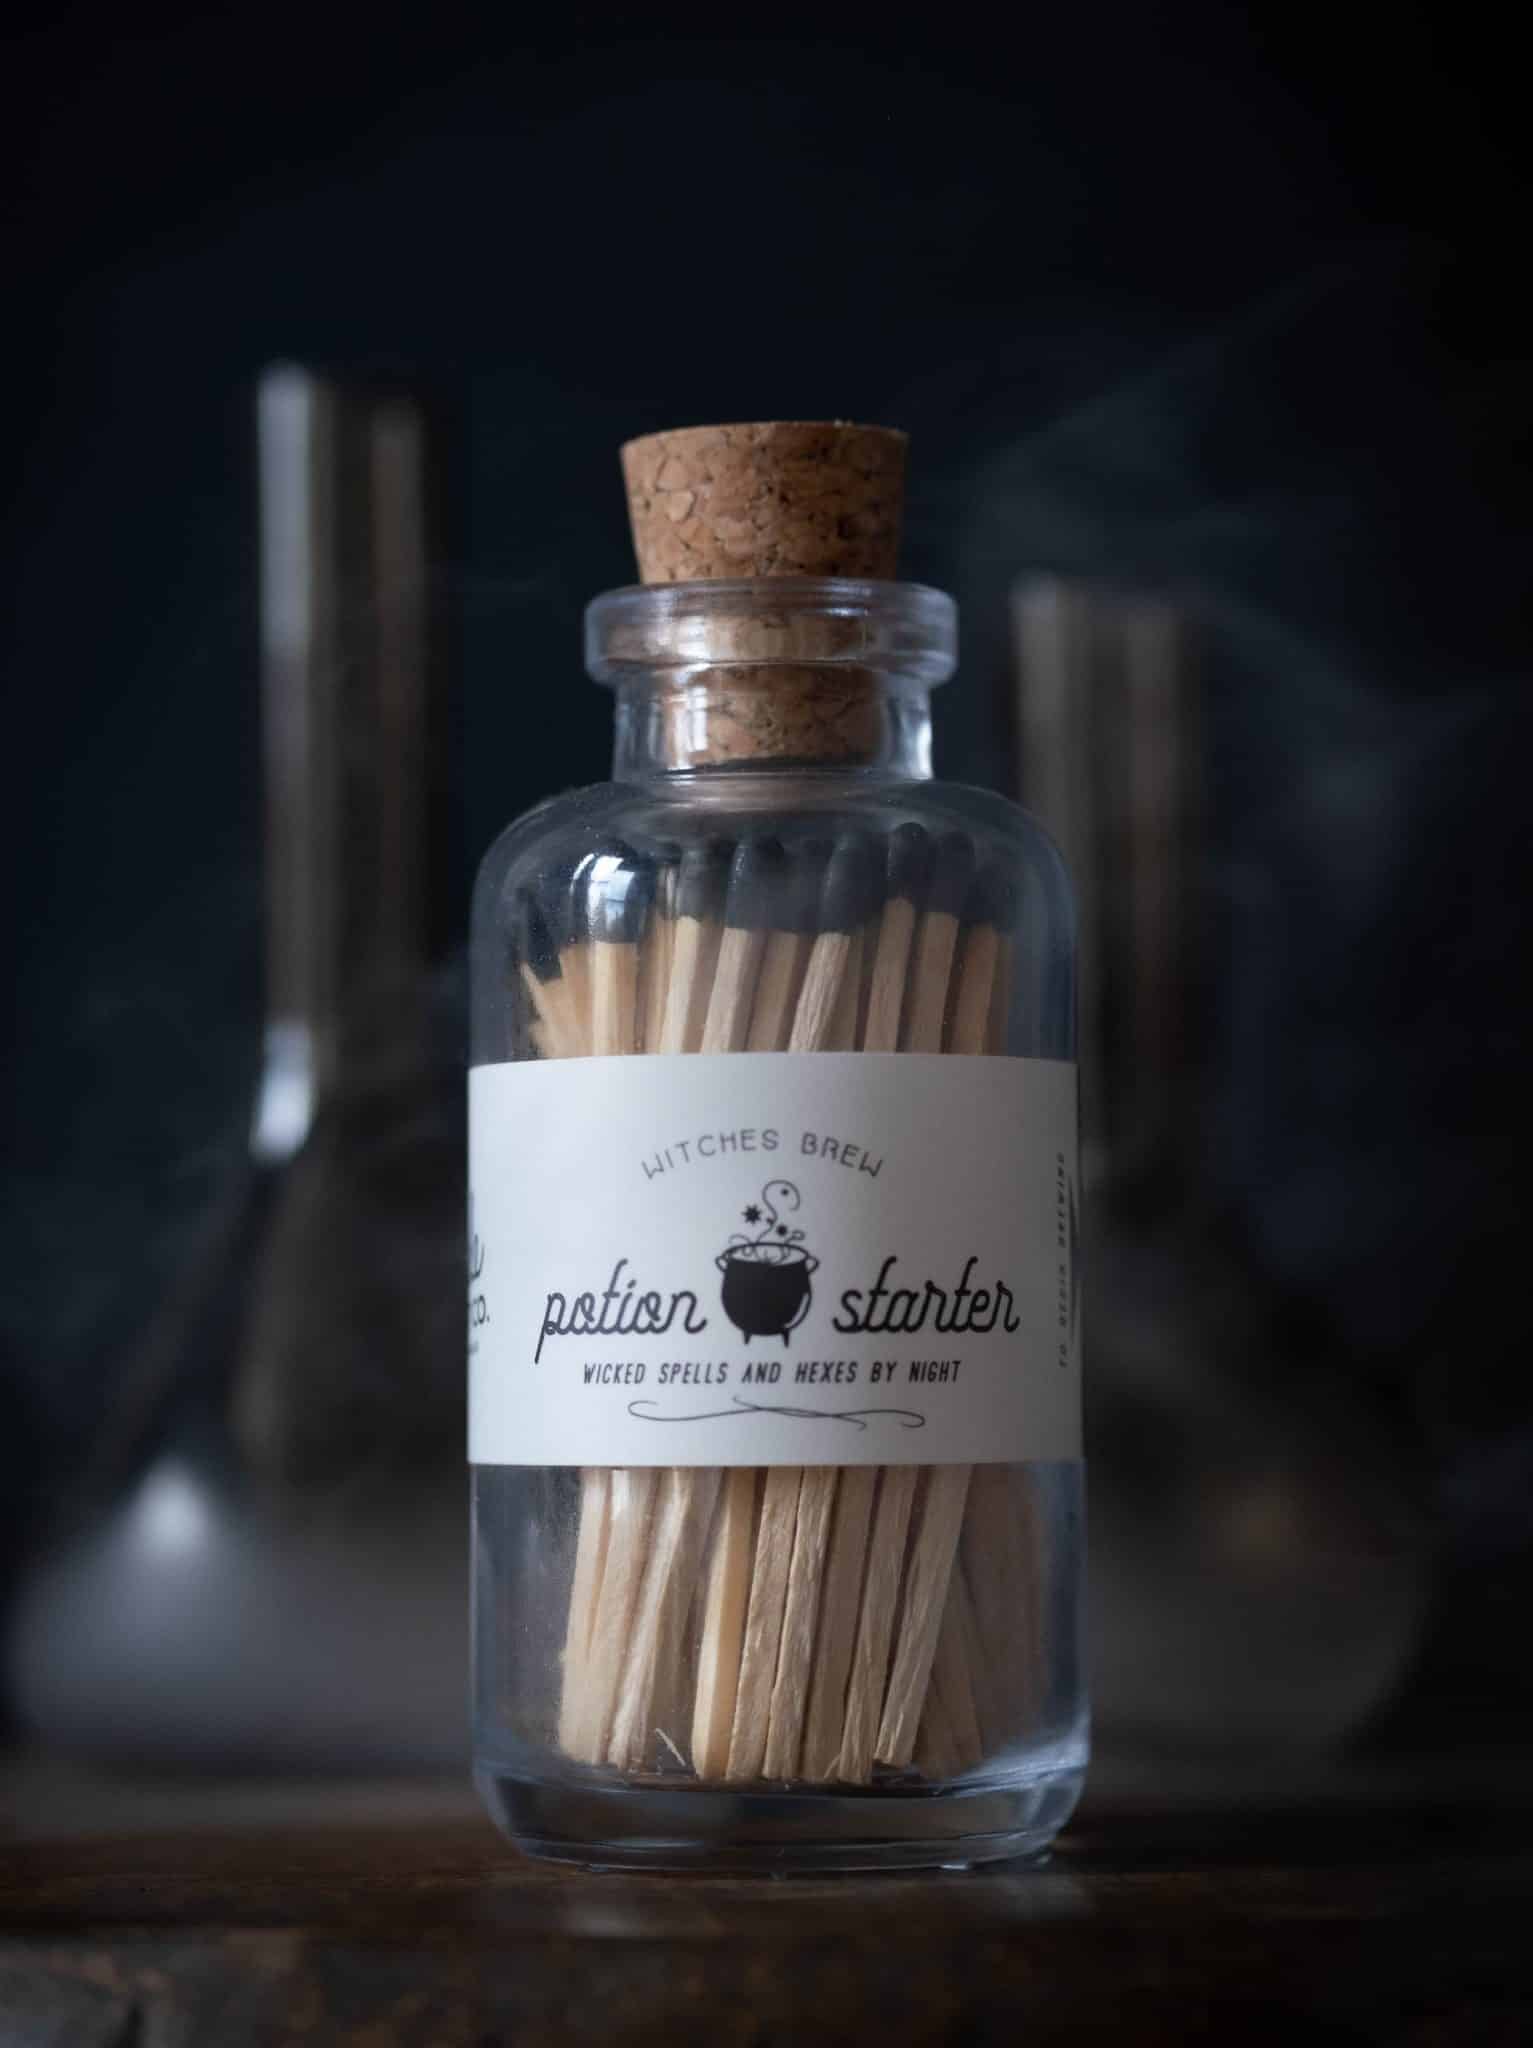 Warm Abode - Large Glass Colored Matches